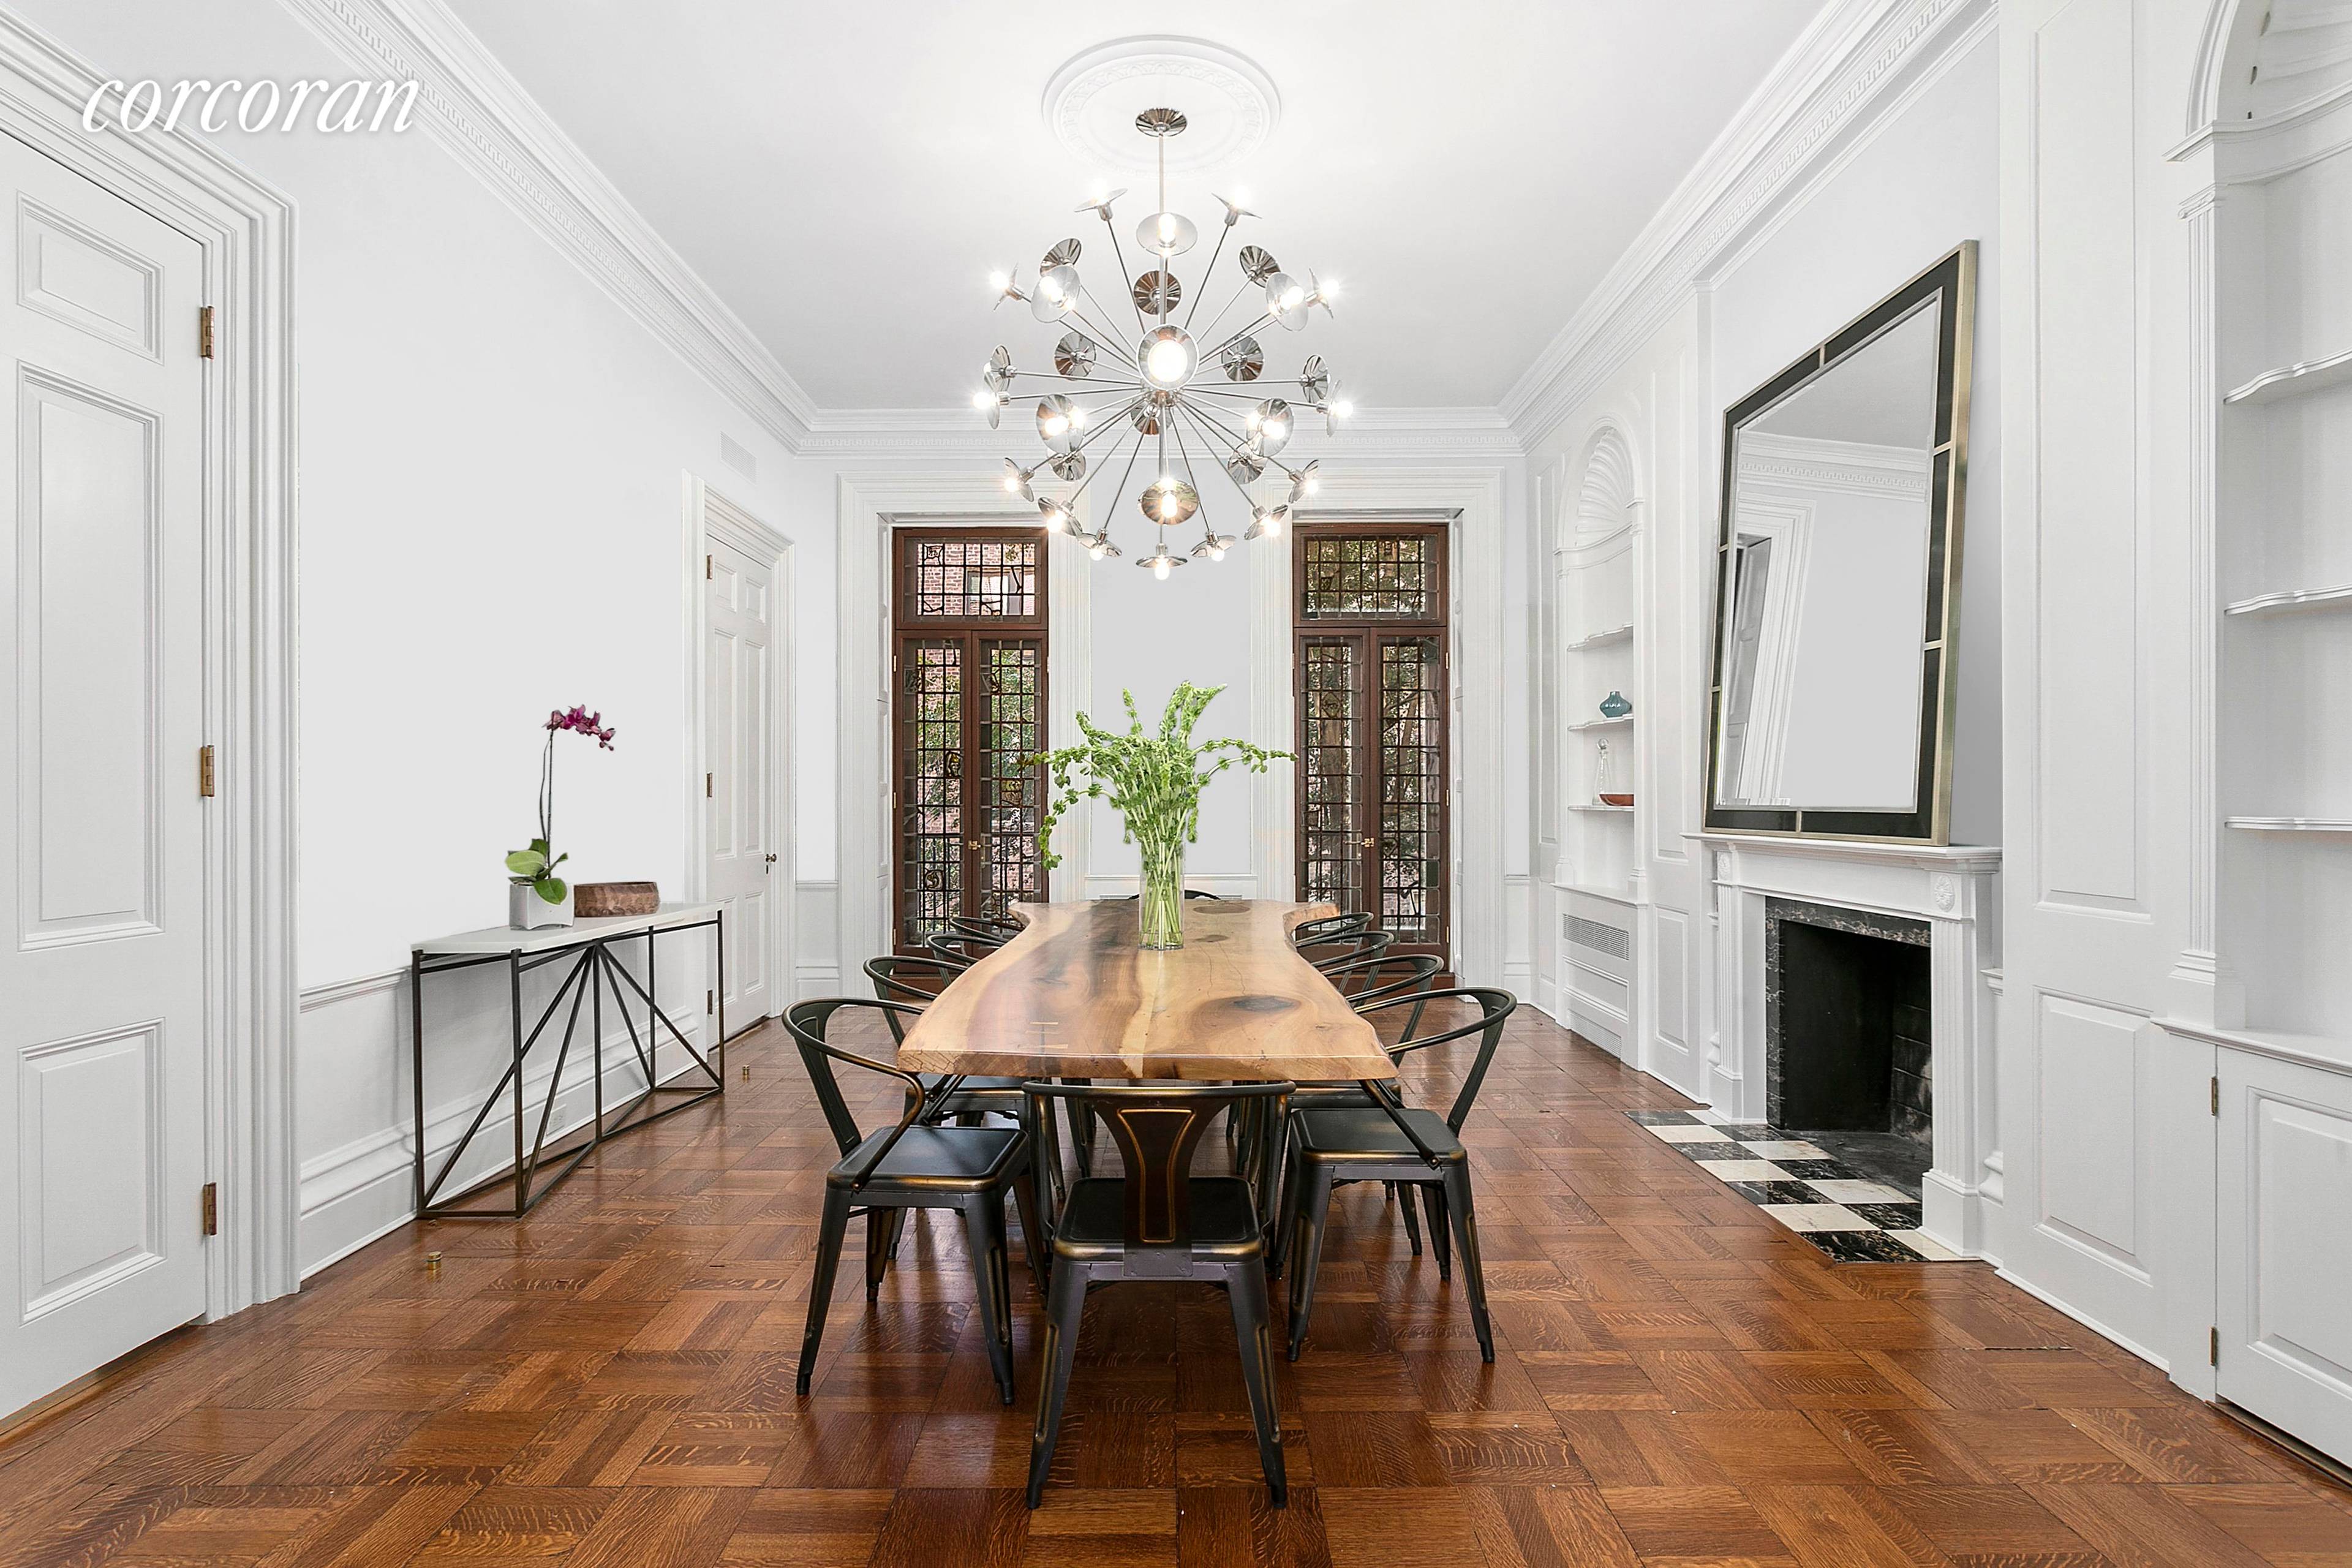 16 Remsen Street is a 26 foot wide, five story townhouse with a finished cellar and four outdoor spaces on the finest block in Brooklyn Heights.